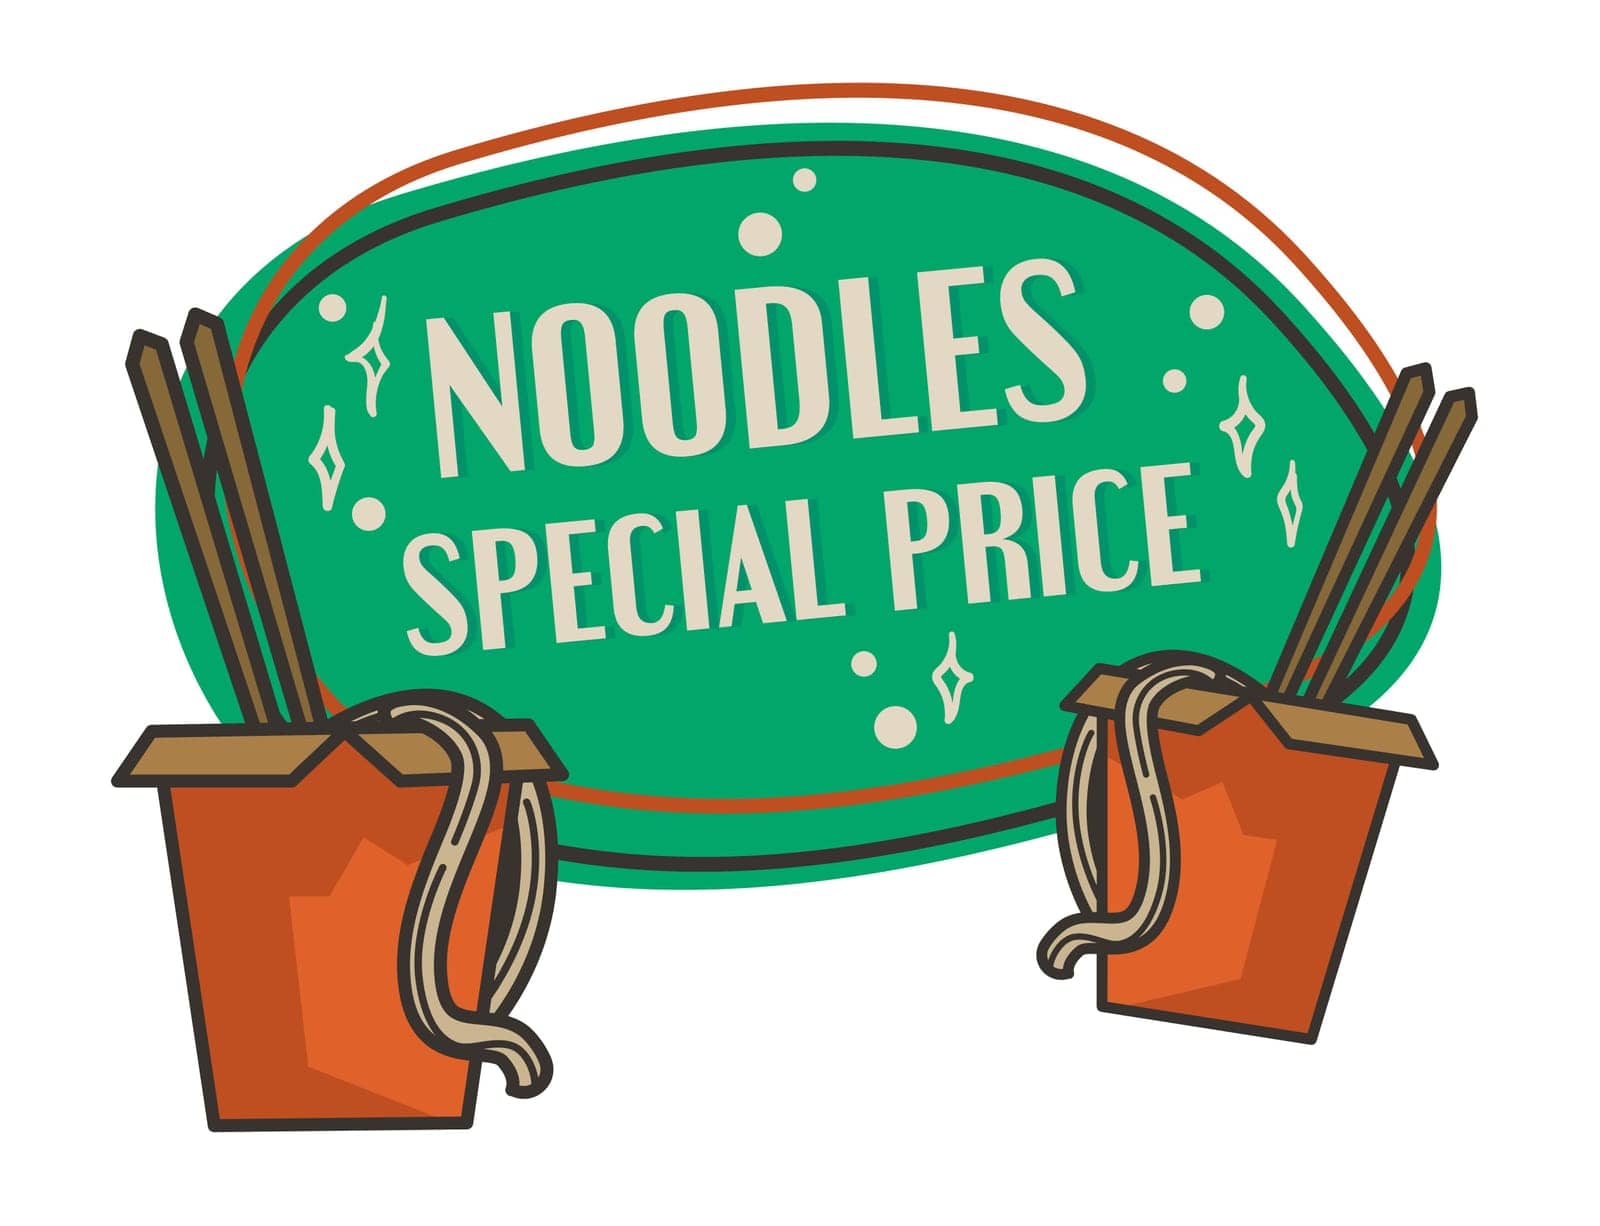 Special price on noodles, tasty asian food label by Sonulkaster